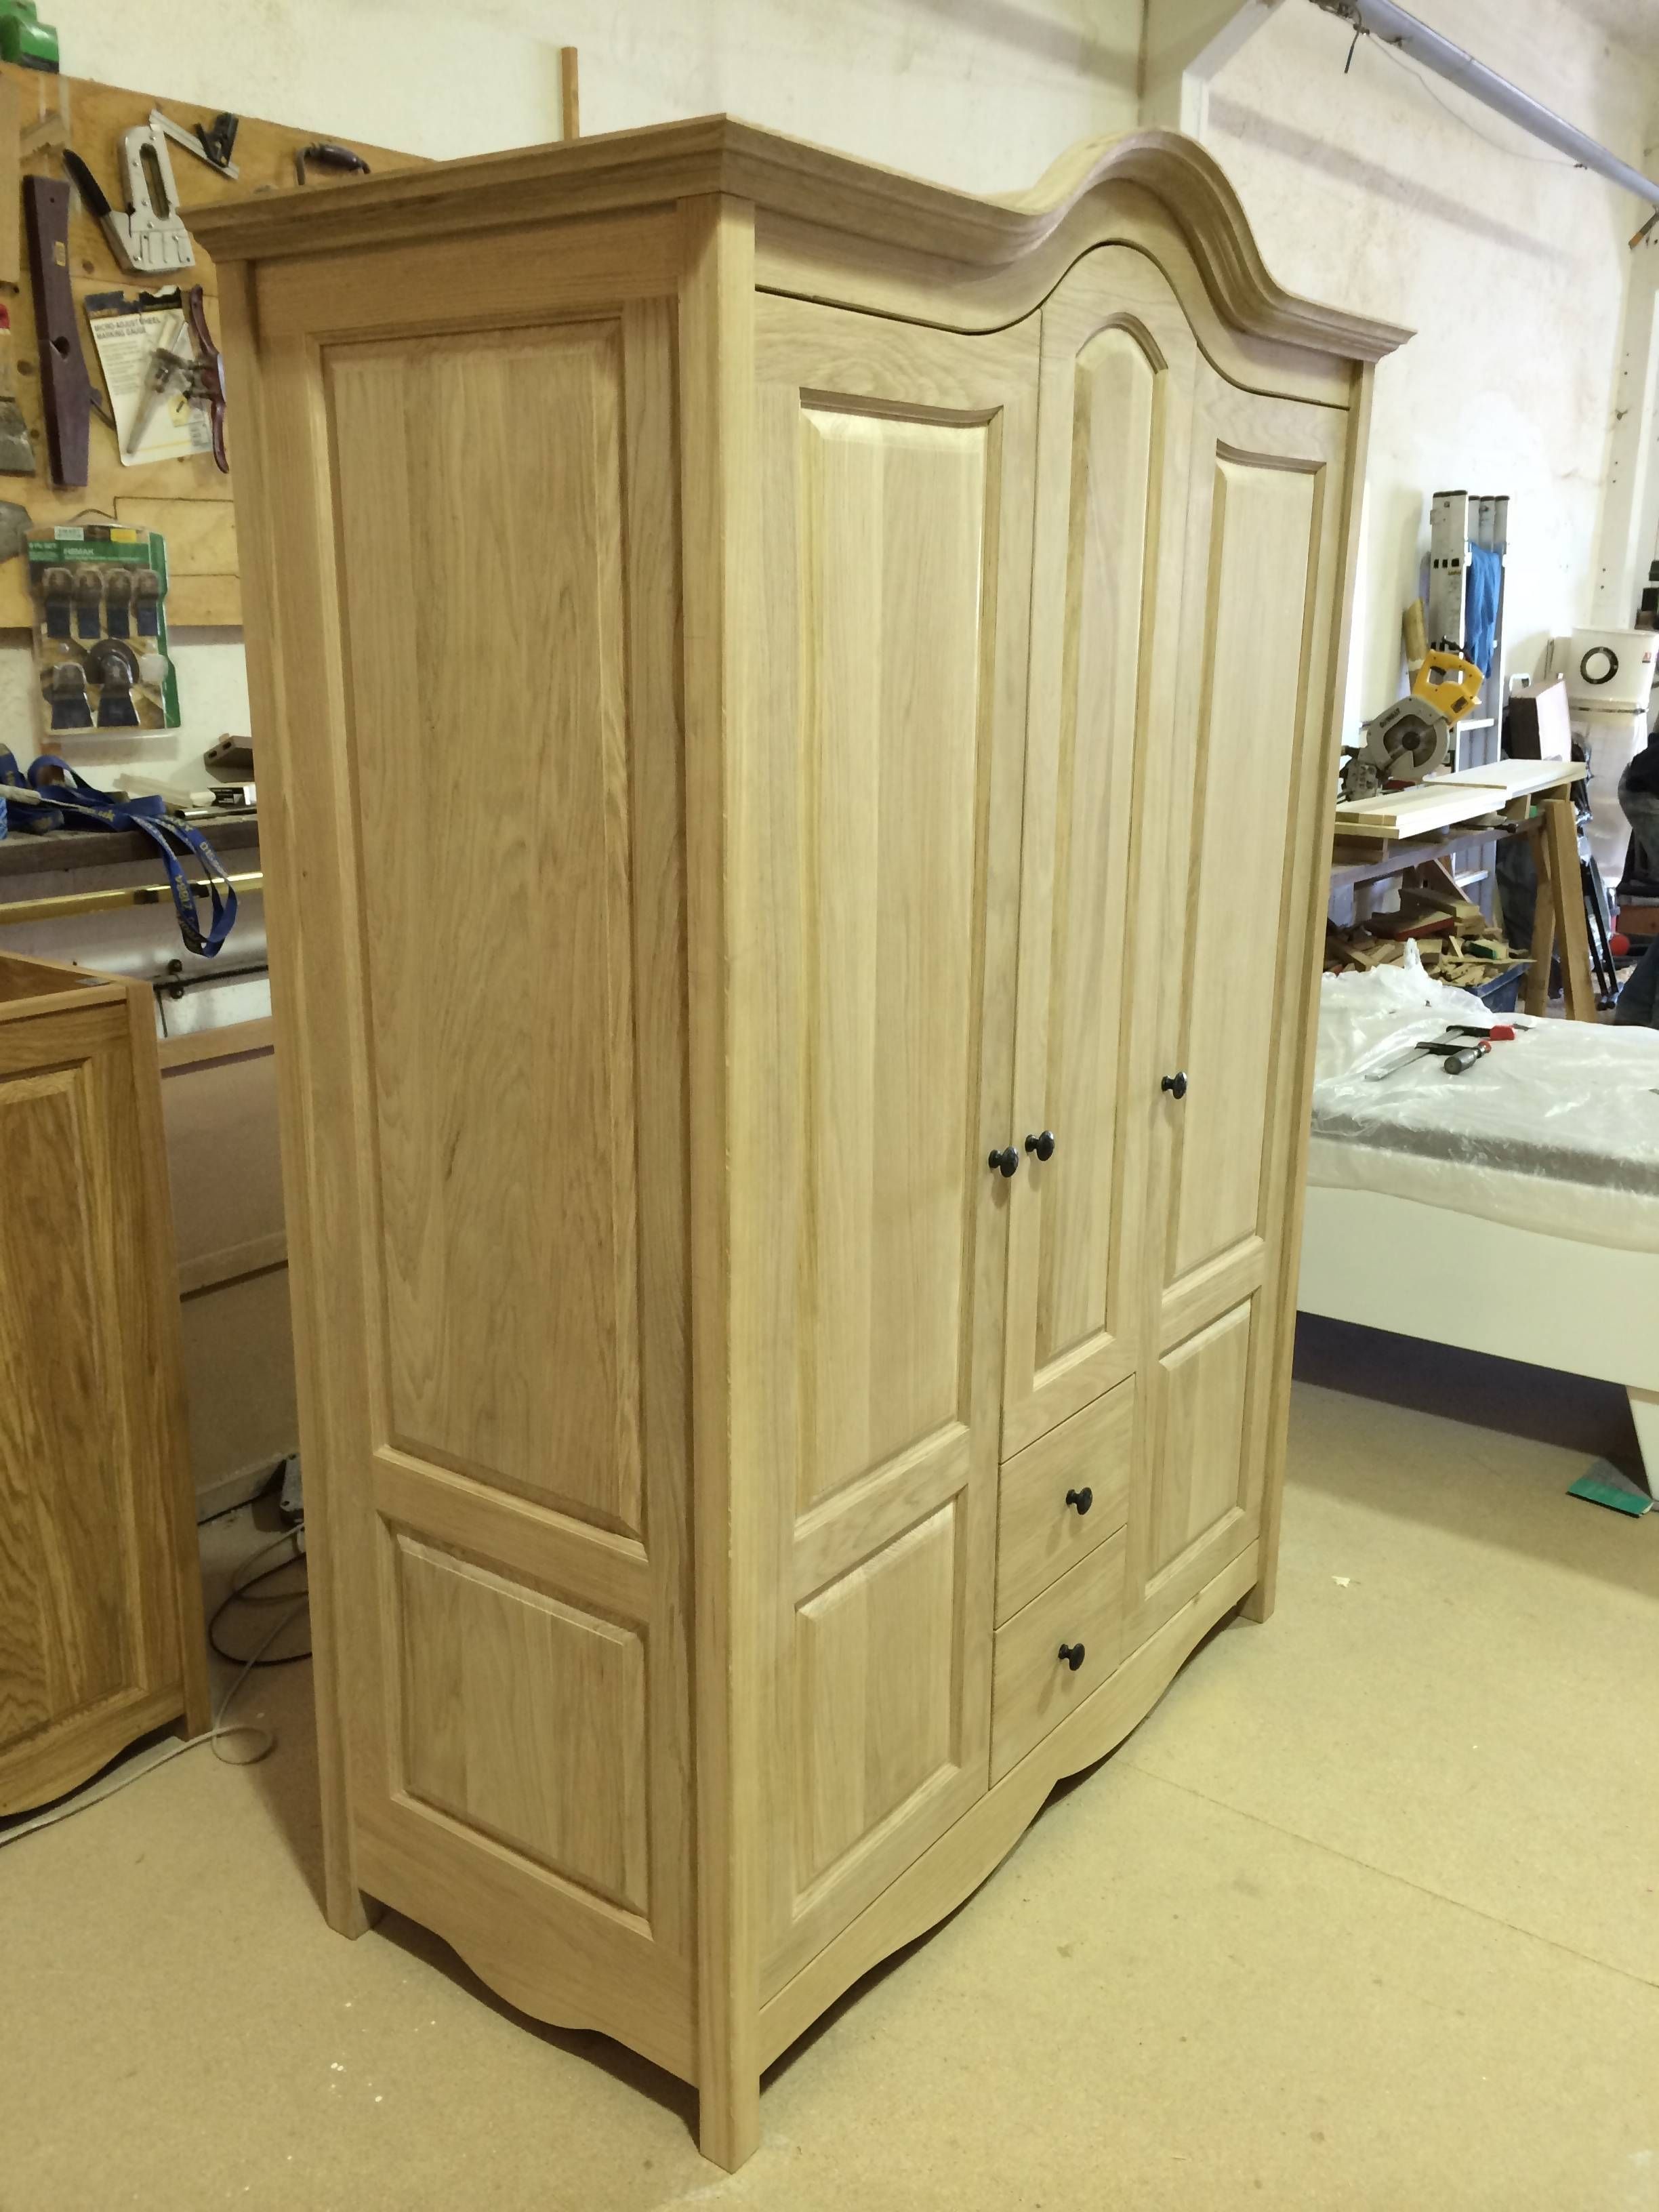 Blog – Bespoke Fitted Furniture Specialists In Essex, Herts And Pertaining To Ornate Wardrobes (View 11 of 15)